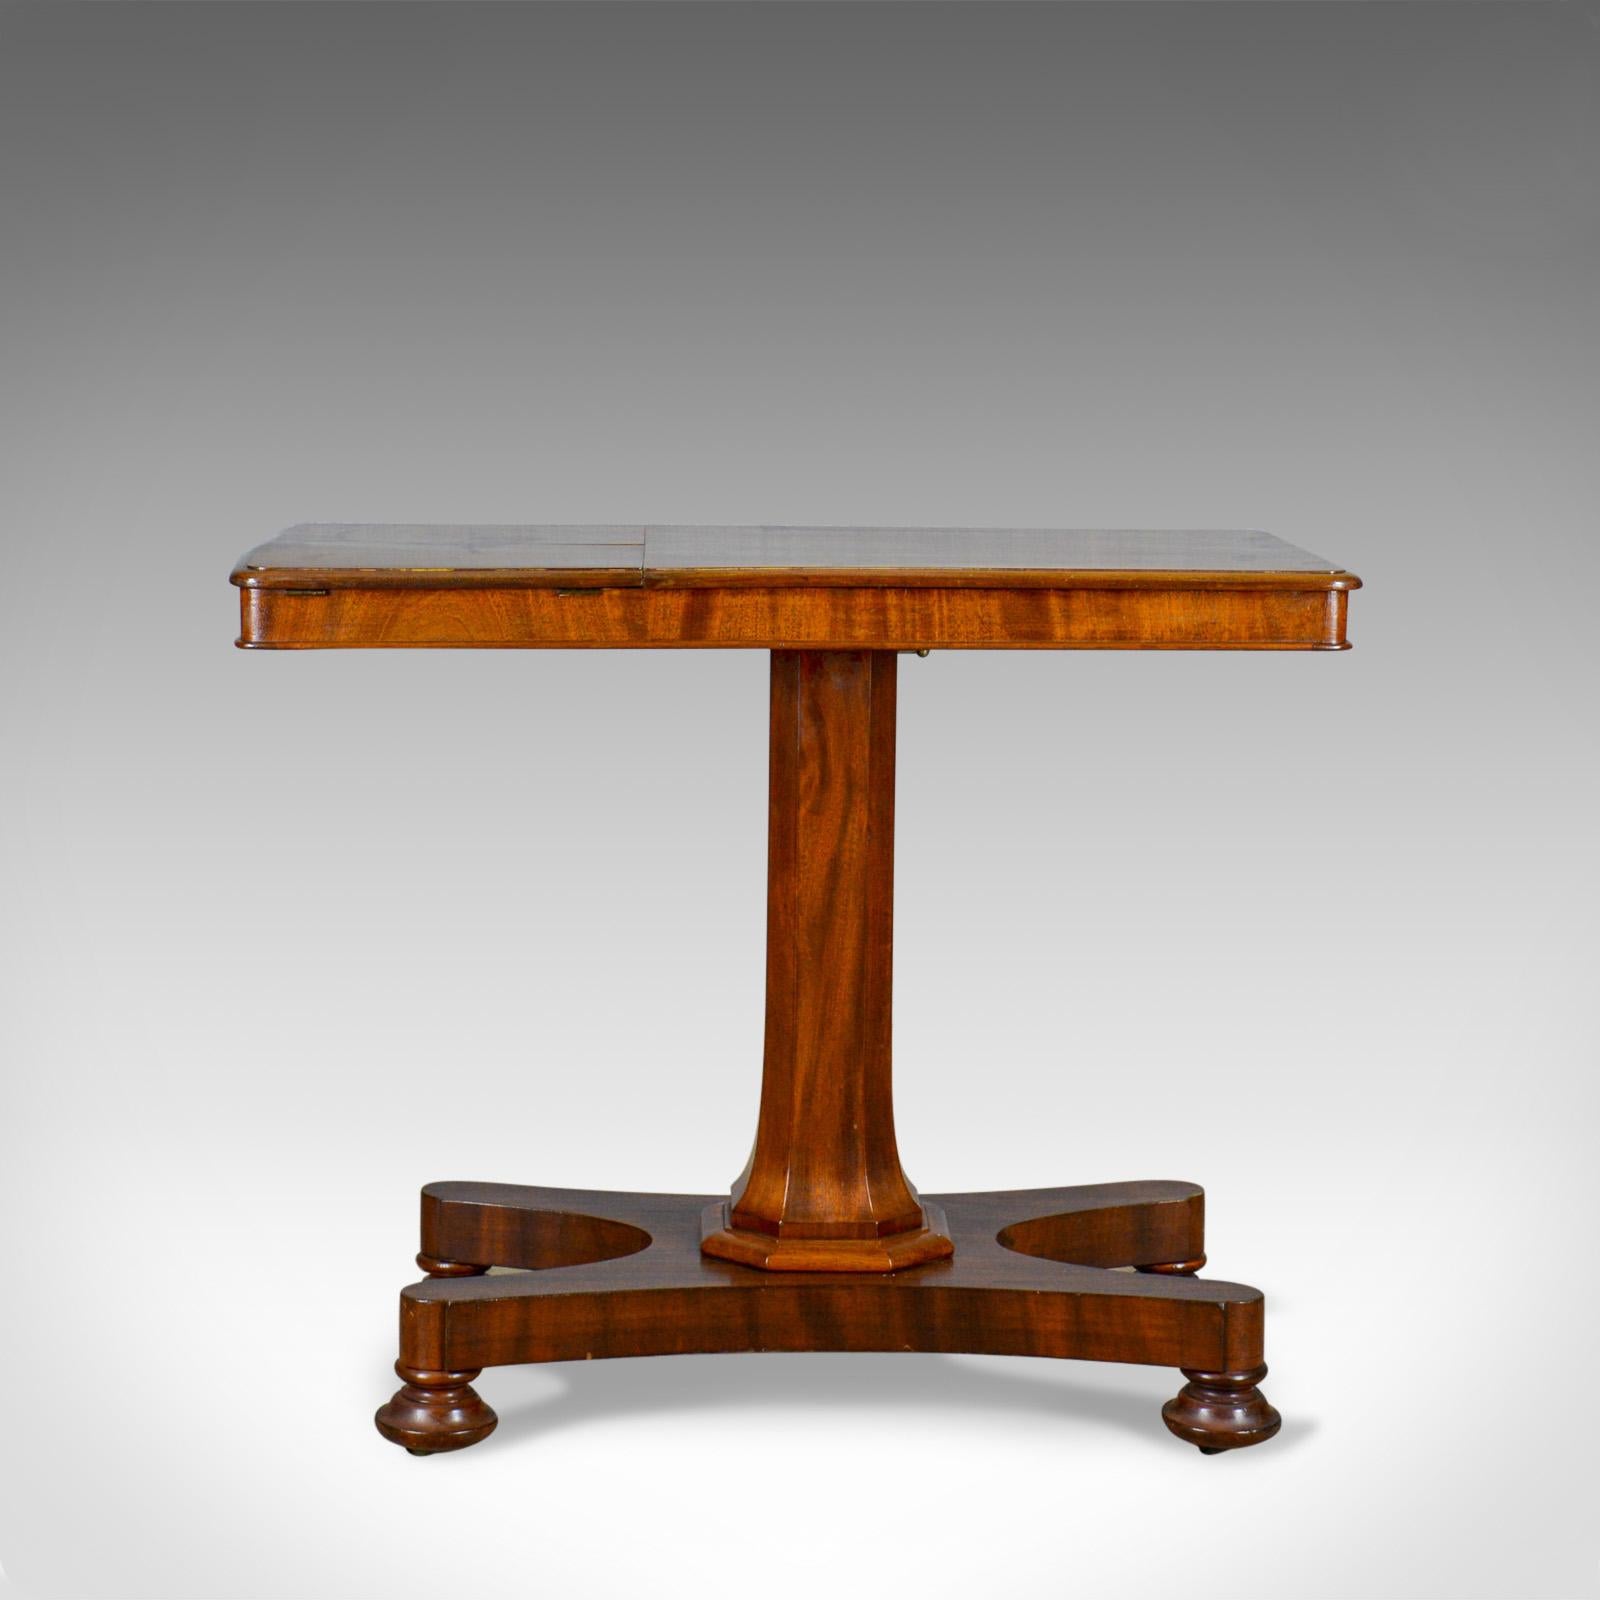 English Antique Reading Table, Duet Music Stand in the Manner of Gillows, circa 1870